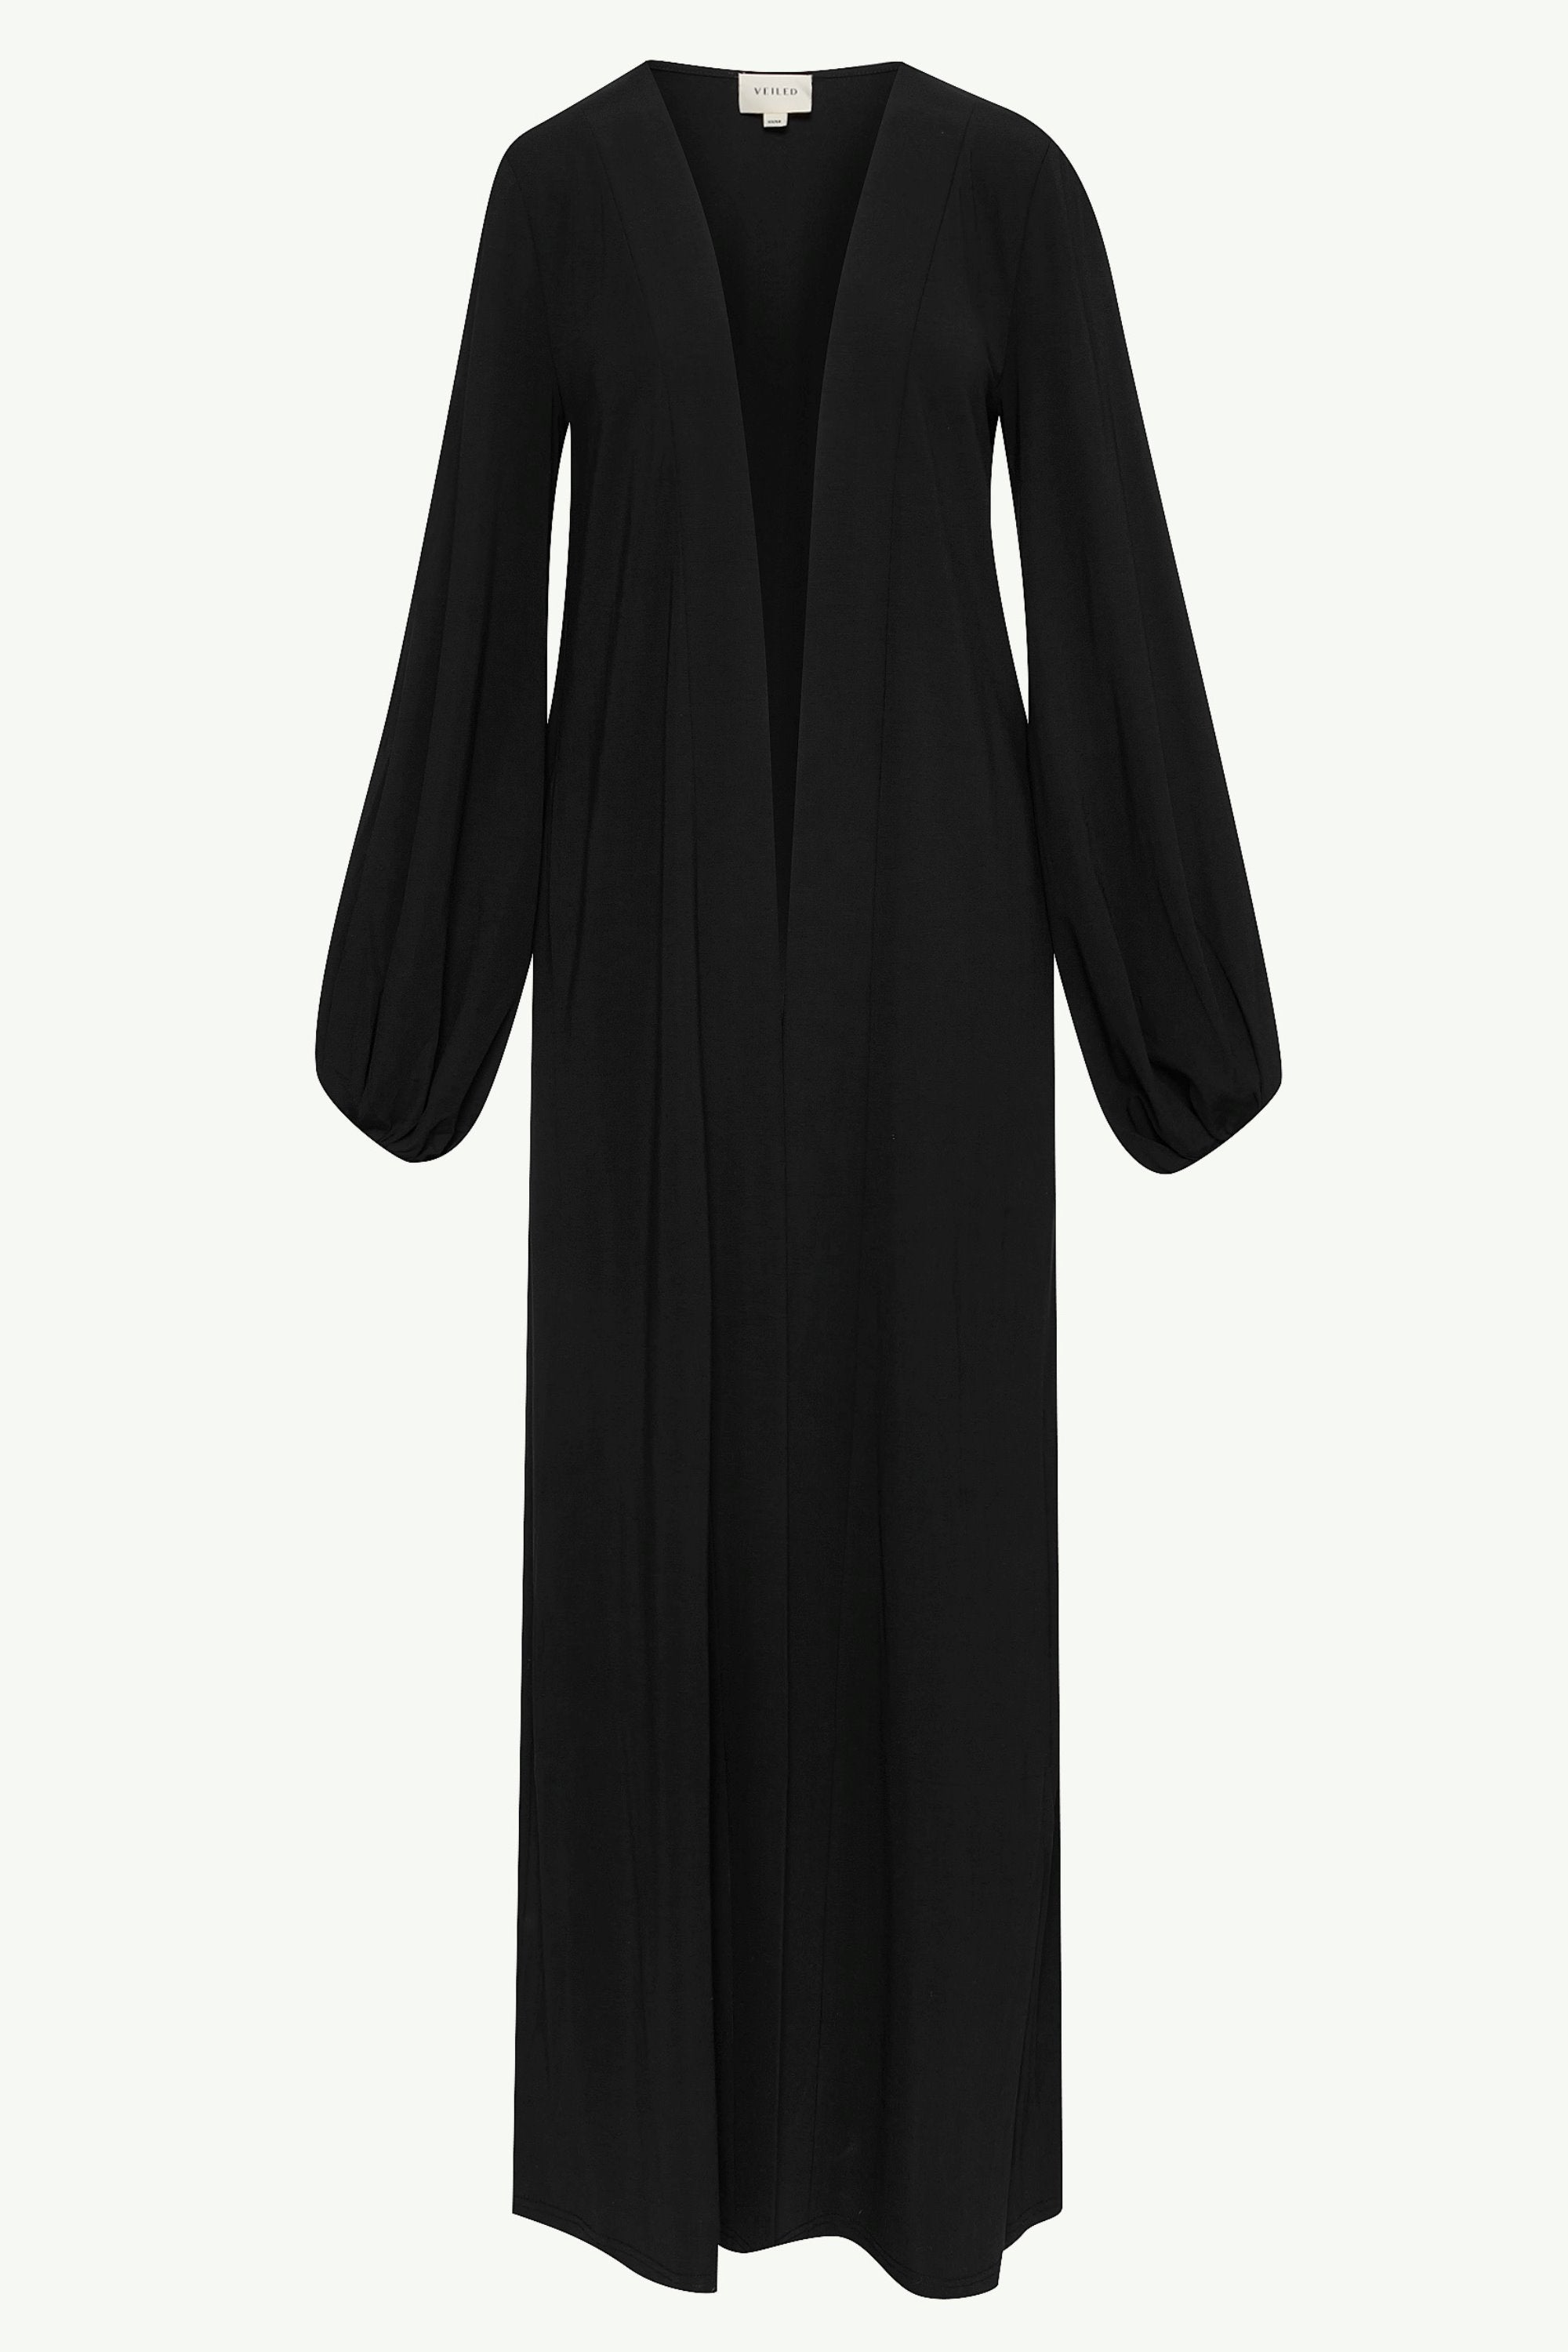 Essential Jersey Open Abaya - Black Clothing Veiled 